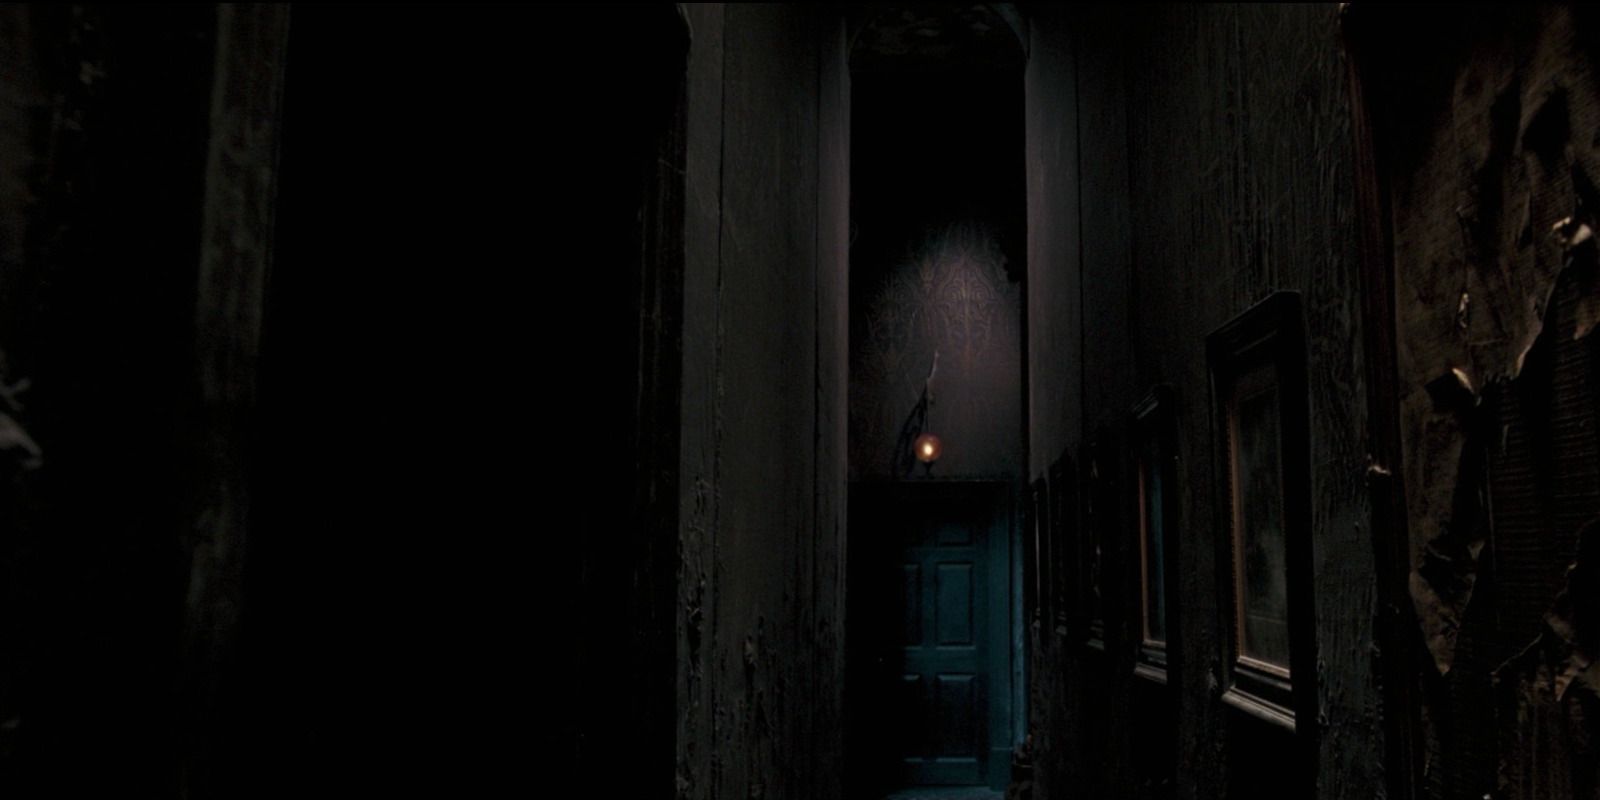 An extendable ear in Grimmauld Place in Harry Potter